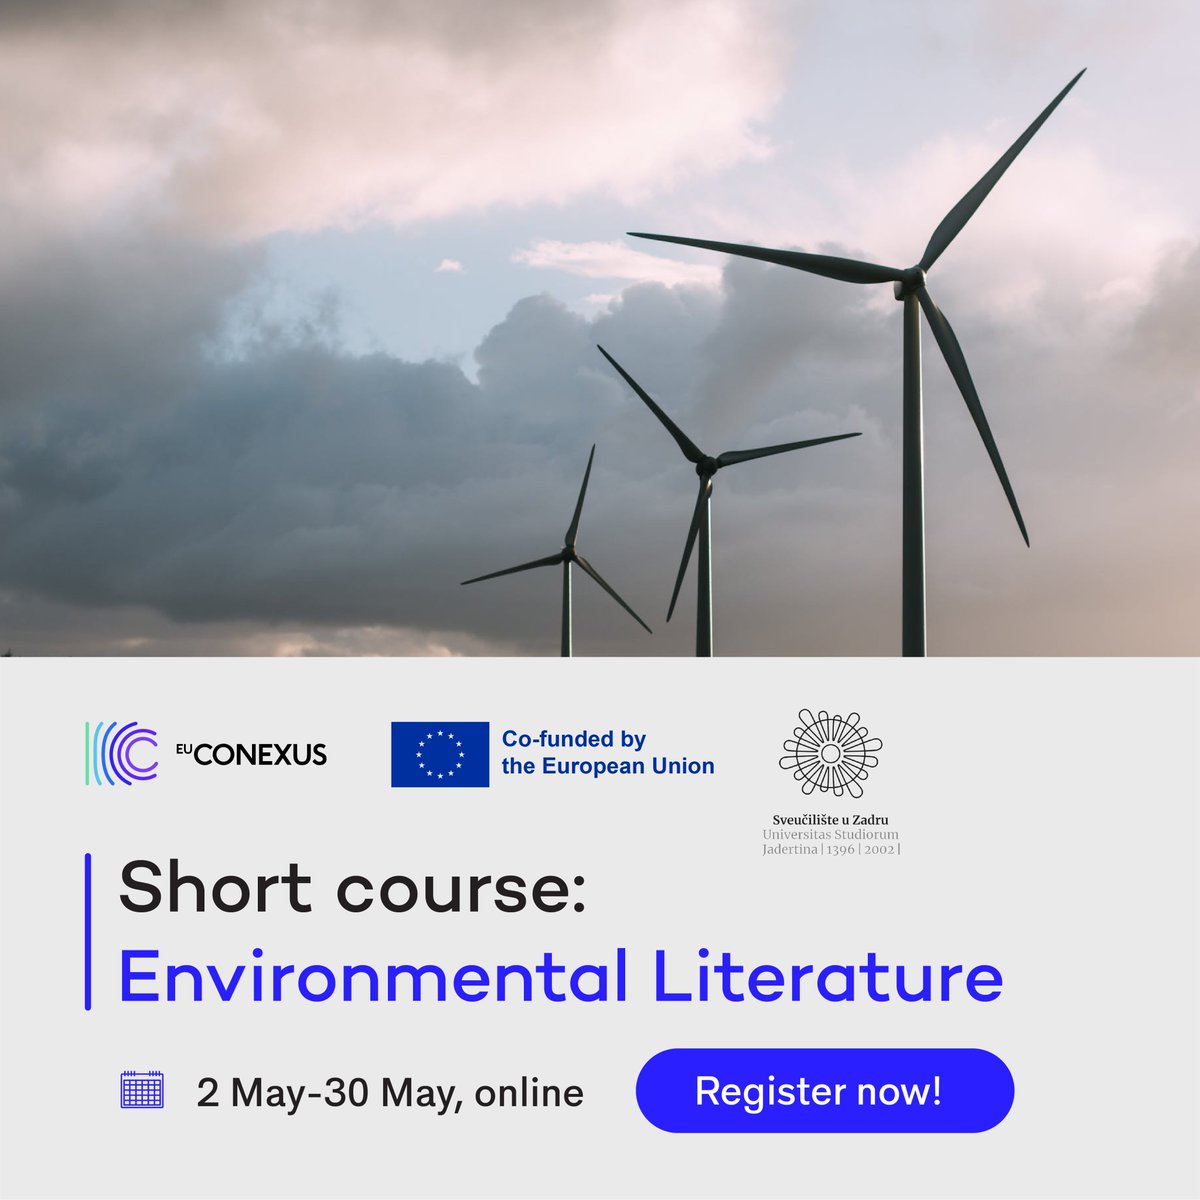 🚀Level up your skills! online short courses that will make your Linkedin and CV bold. Provided by University of Zadar Apply until 15th April. REgister now eu-conexus.eu/en/micro-crede… #futureskills #career #microcredentials #courses